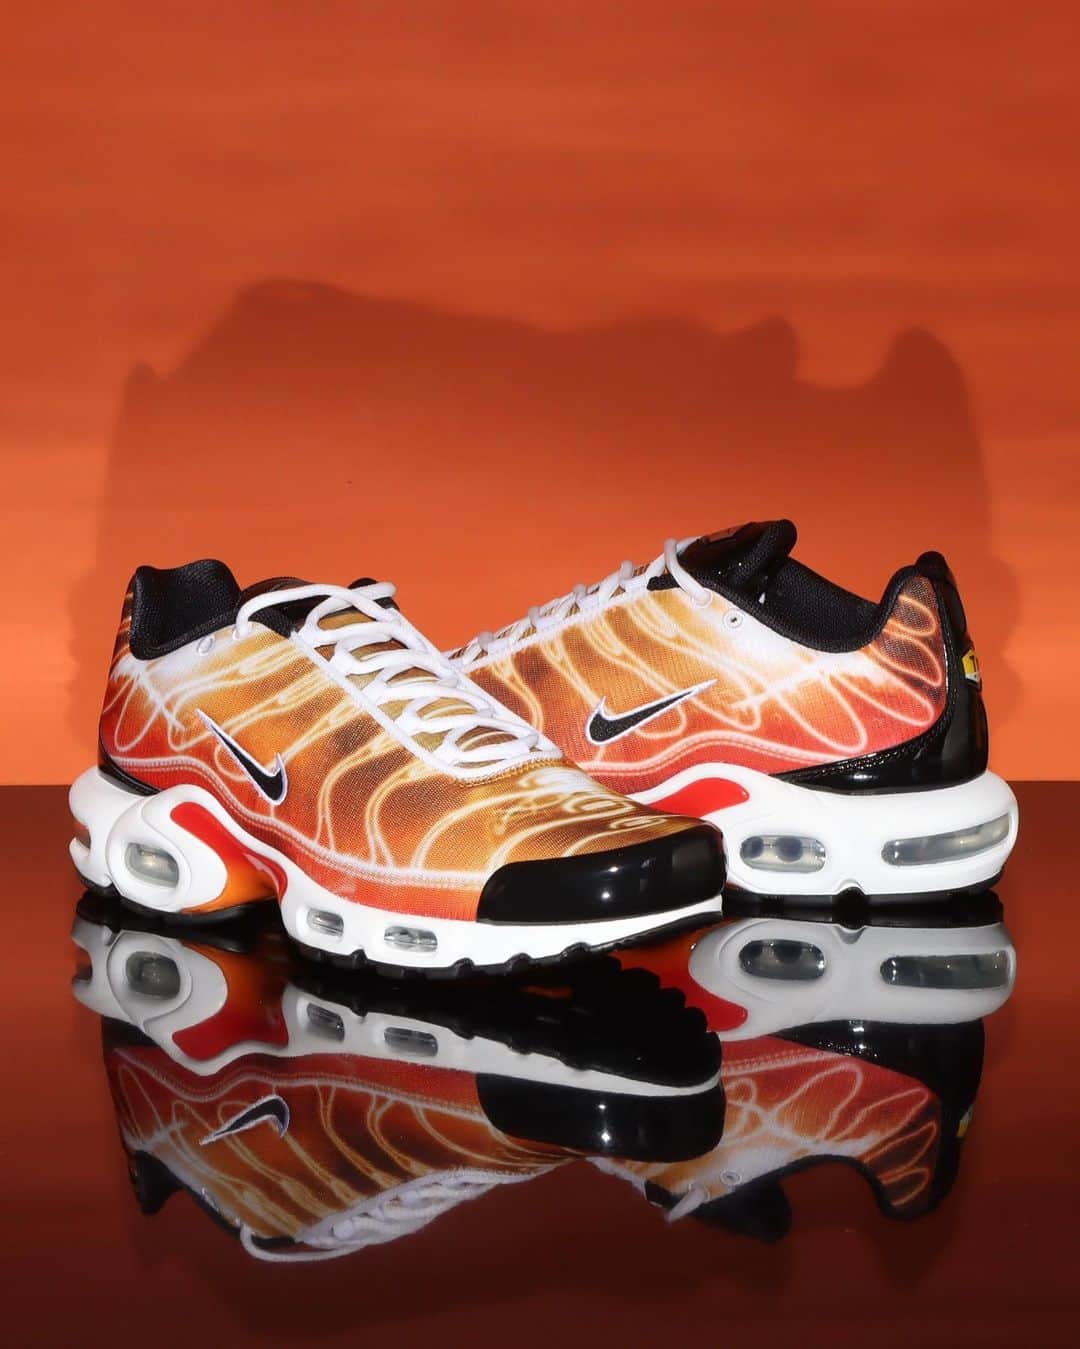 アトモスさんのインスタグラム写真 - (アトモスInstagram)「.  NIKE AIR MAX PLUS OG “Light Photography”  通気性に優れたメッシュが涼しさを保ちながら、炎のようなケージがストリートに熱気をもたらす。ナイキ エア マックス プラスは、チューニングされたNike Airでプレミアムな安定性と驚異的なクッショニングを実現。サポート力のある中足部のアーチはクジラの尾をイメージ。象徴的なプラスチックのかごのデザインラインは、ヤシの木と海の波を連想させる。もともとパフォーマンスランニング用に設計されたNike Airユニットが、持続的な軽量クッショニングを提供。軽量メッシュの合成素材のアッパーが通気性と耐久性をプラス。ラバーアウトソールが耐久性に優れたトラクションを発揮。 本商品は。7月28日(金)よりatmos各店(一部店舗除く)、atmosオンラインにて発売致します。  NIKE AIR MAX PLUS OG "Light Photography"  A flaming cage brings the heat to the streets while breathable mesh keeps you cool. The Nike Air Max Plus delivers premium stability and incredible cushioning with tuned Nike Air. The supportive midfoot arch is inspired by a whale's tail. The iconic plastic cage design line evokes palm trees and ocean waves. Nike Air units, originally designed for performance running, provide sustained lightweight cushioning. Lightweight mesh synthetic upper adds breathability and durability. Rubber outsole provides durable traction. This product will be available at atmos stores (excluding some stores) and atmos online from Friday, July 28.  #atmos #airmaxplus #nike」7月17日 18時01分 - atmos_japan